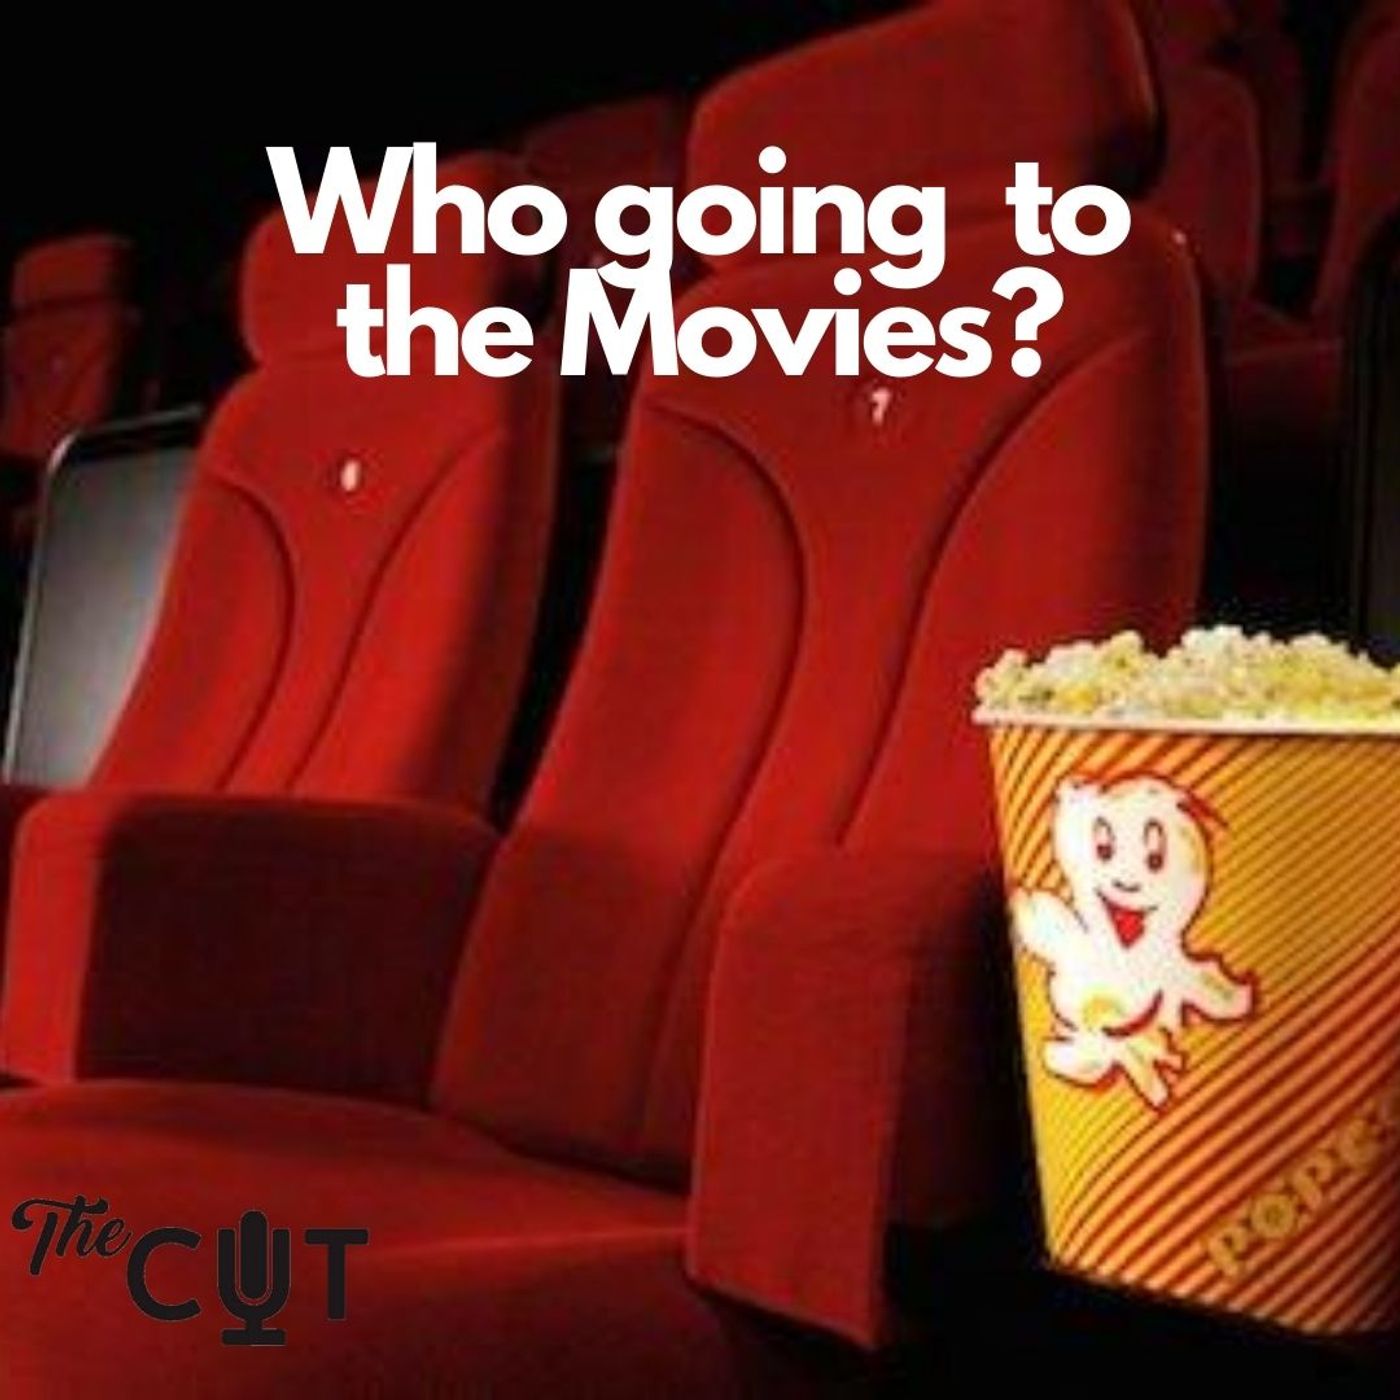 67: Who going to the movies?